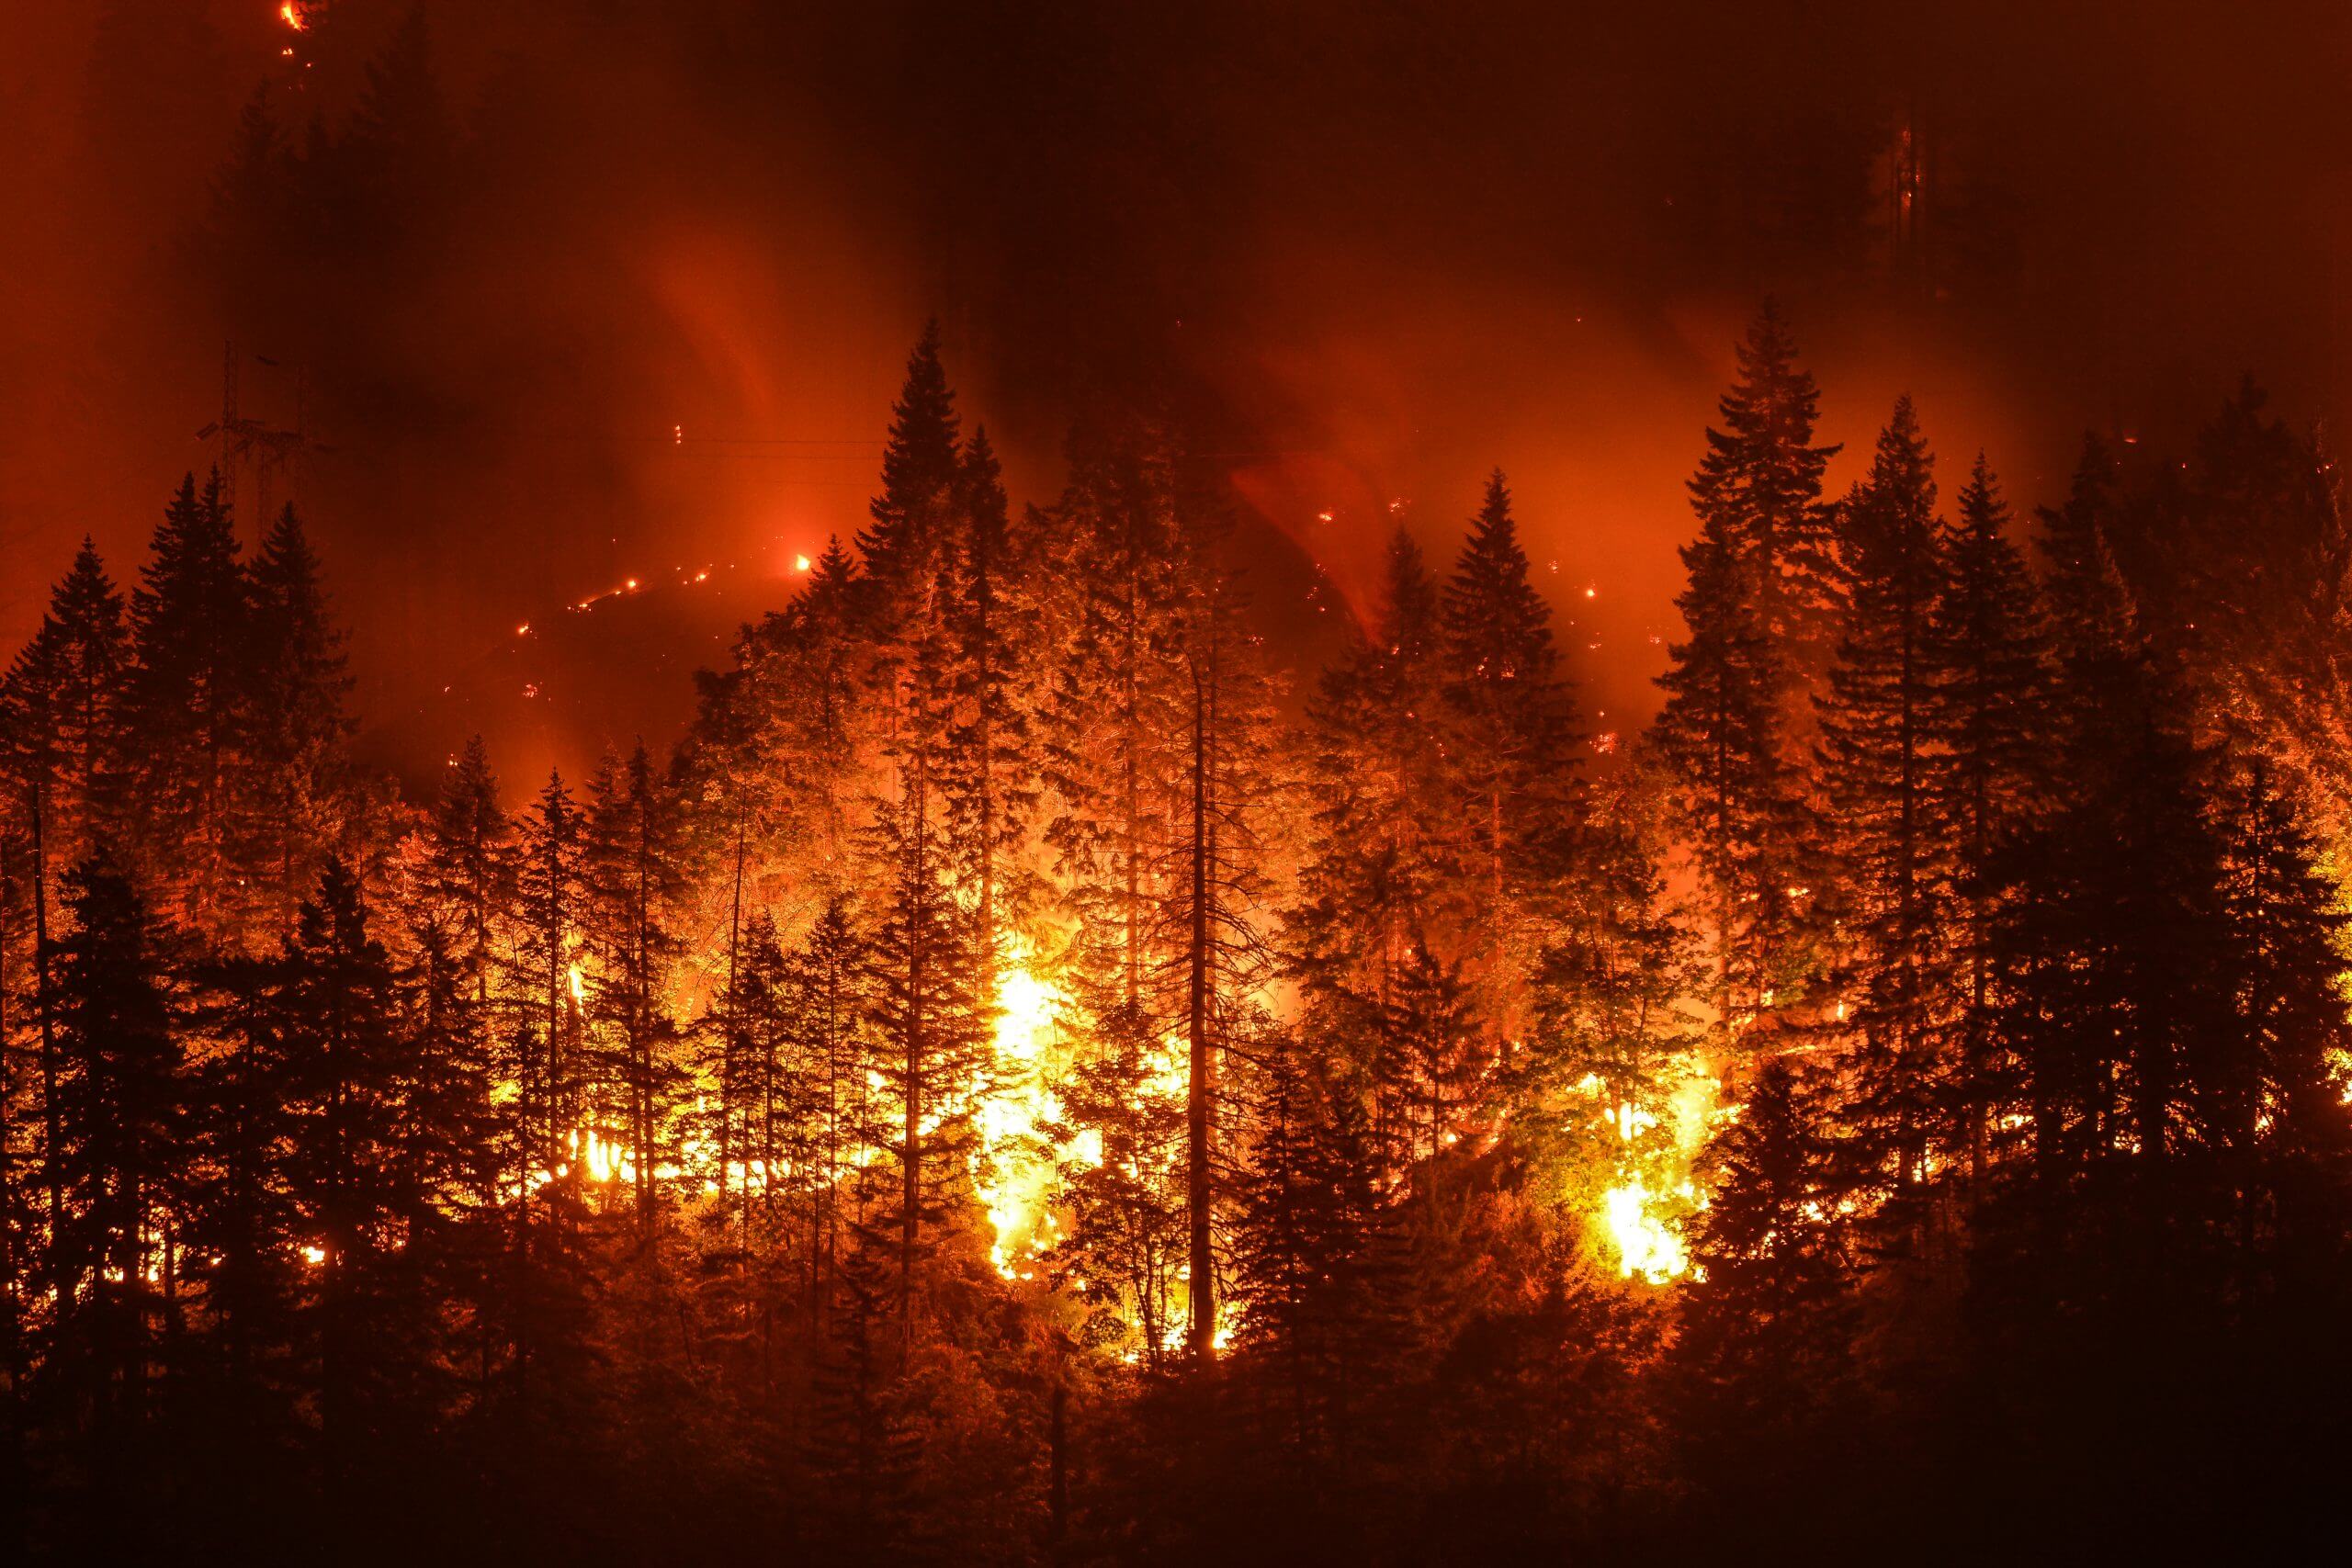 Environmental Factors: What about Wildfires?